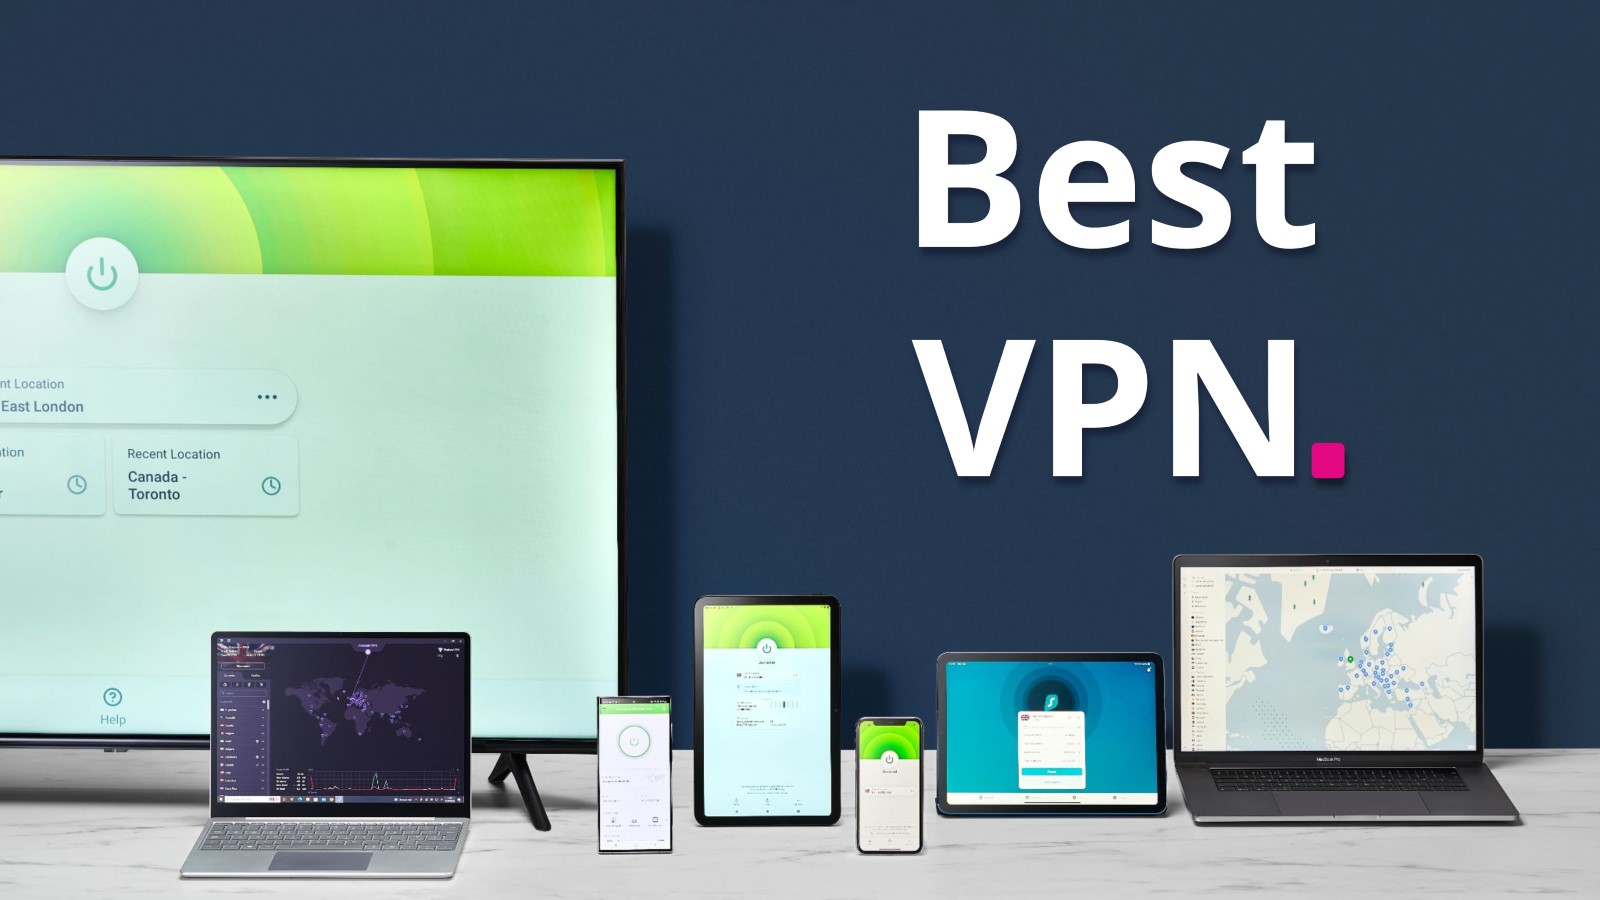 Best VPN written next to a variety of mobile devices, tablets, laptops and a TV all running different VPN software